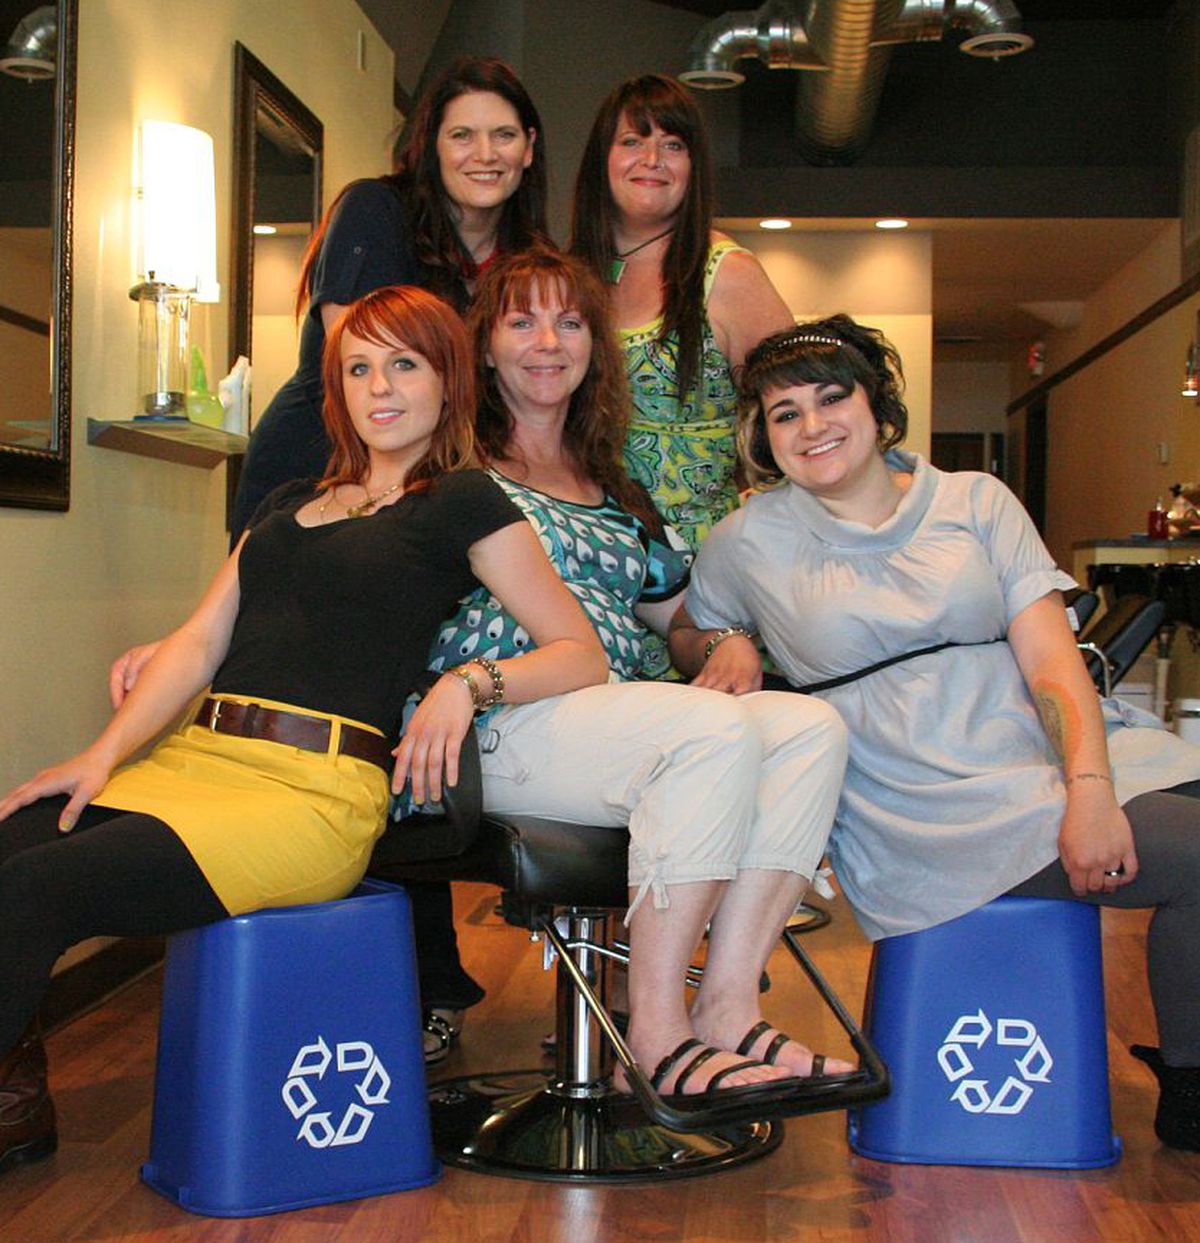 Green Salon and Day Spa in downtown Spokane took large steps to reduce its environmental impact, including recycling much of its used products, improving ventilation and avoid many more toxic cosmetic products. Owners/Employees include, front row, from left, Christian Baker, Cheryl Lystad, Lachele Pate. Back row, Heidi Crow and Annie Grieve. (Courtesy photo)